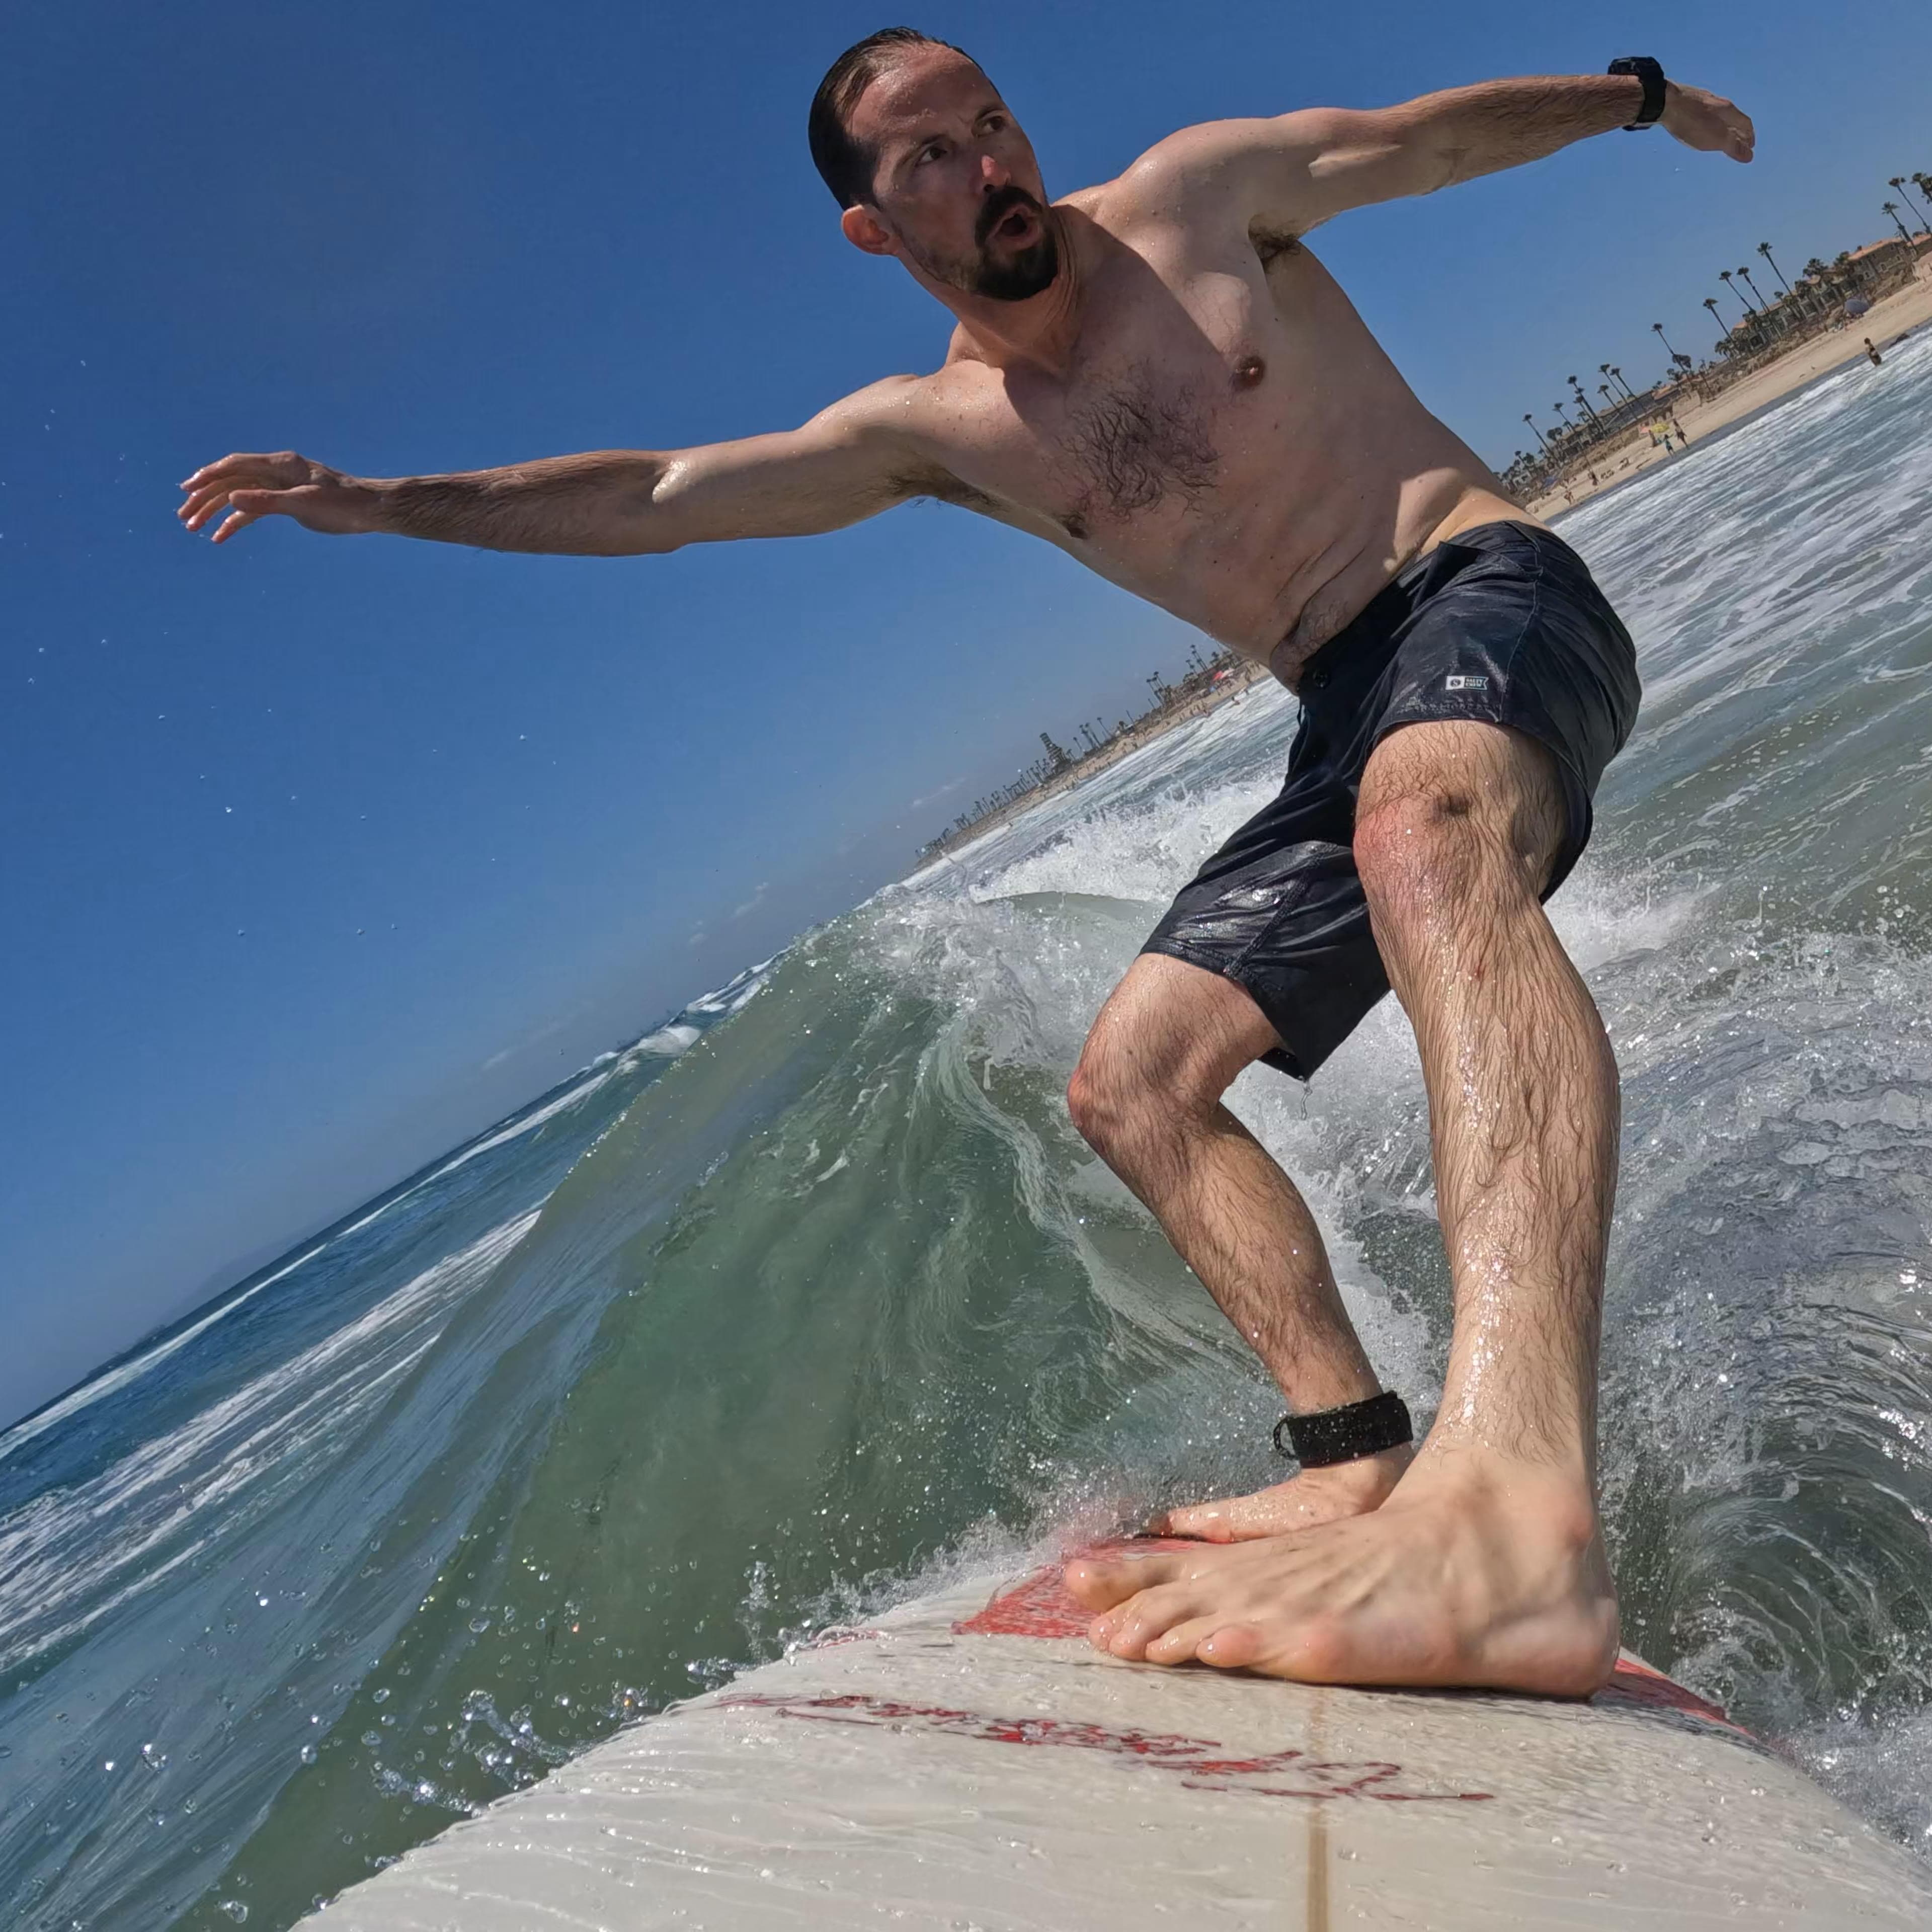 Hi, my name is Paul and I tend to surf in San Clemente at Trestles Beach.